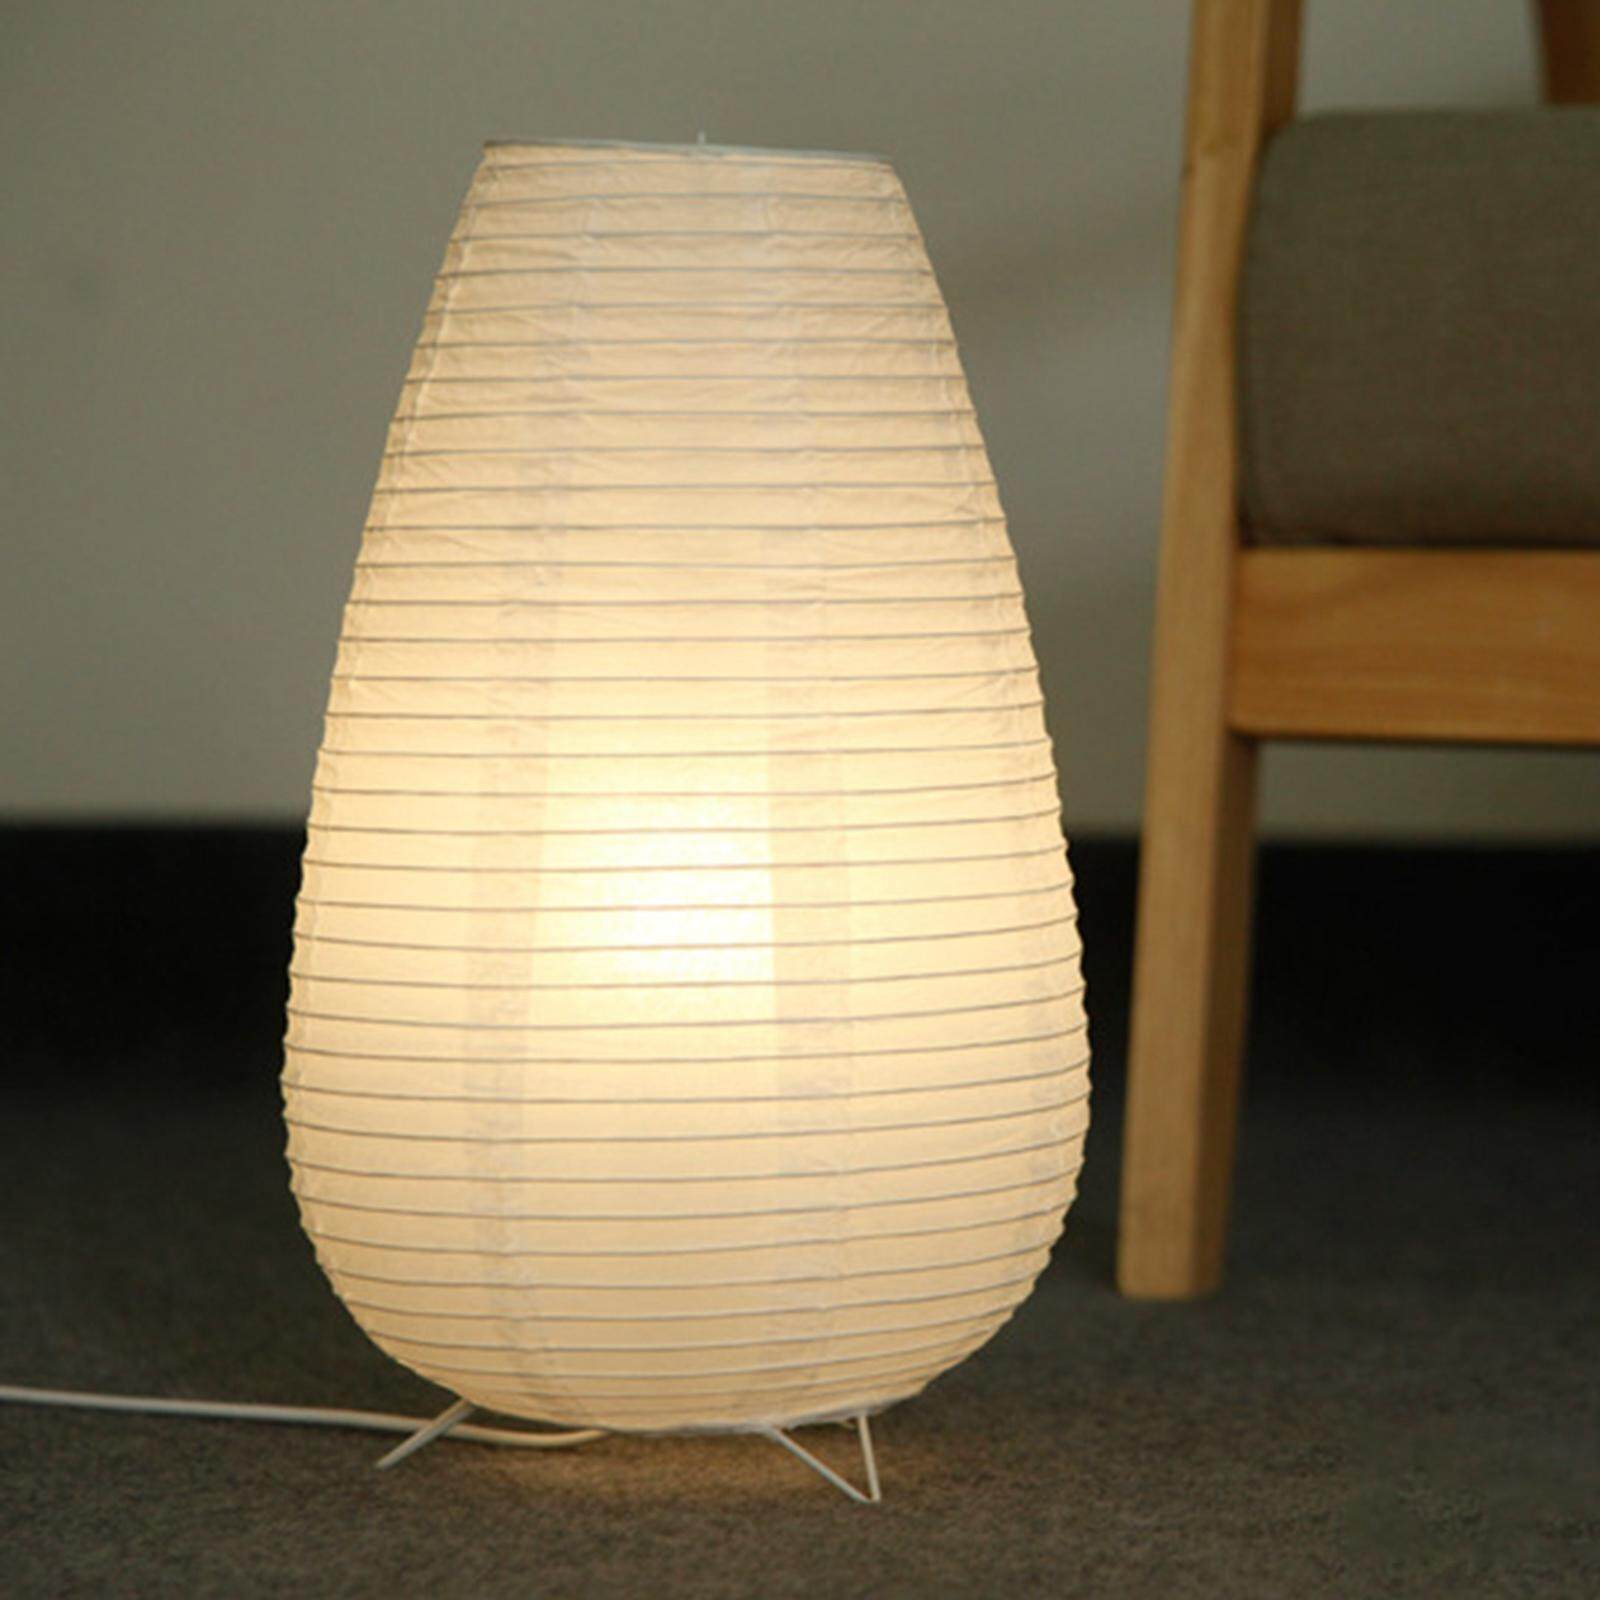 Paper Lantern Desk Lamp Japanese Bedroom Bedside Night Light, Home Decorations Creative Paper Lampshade Table Lamp